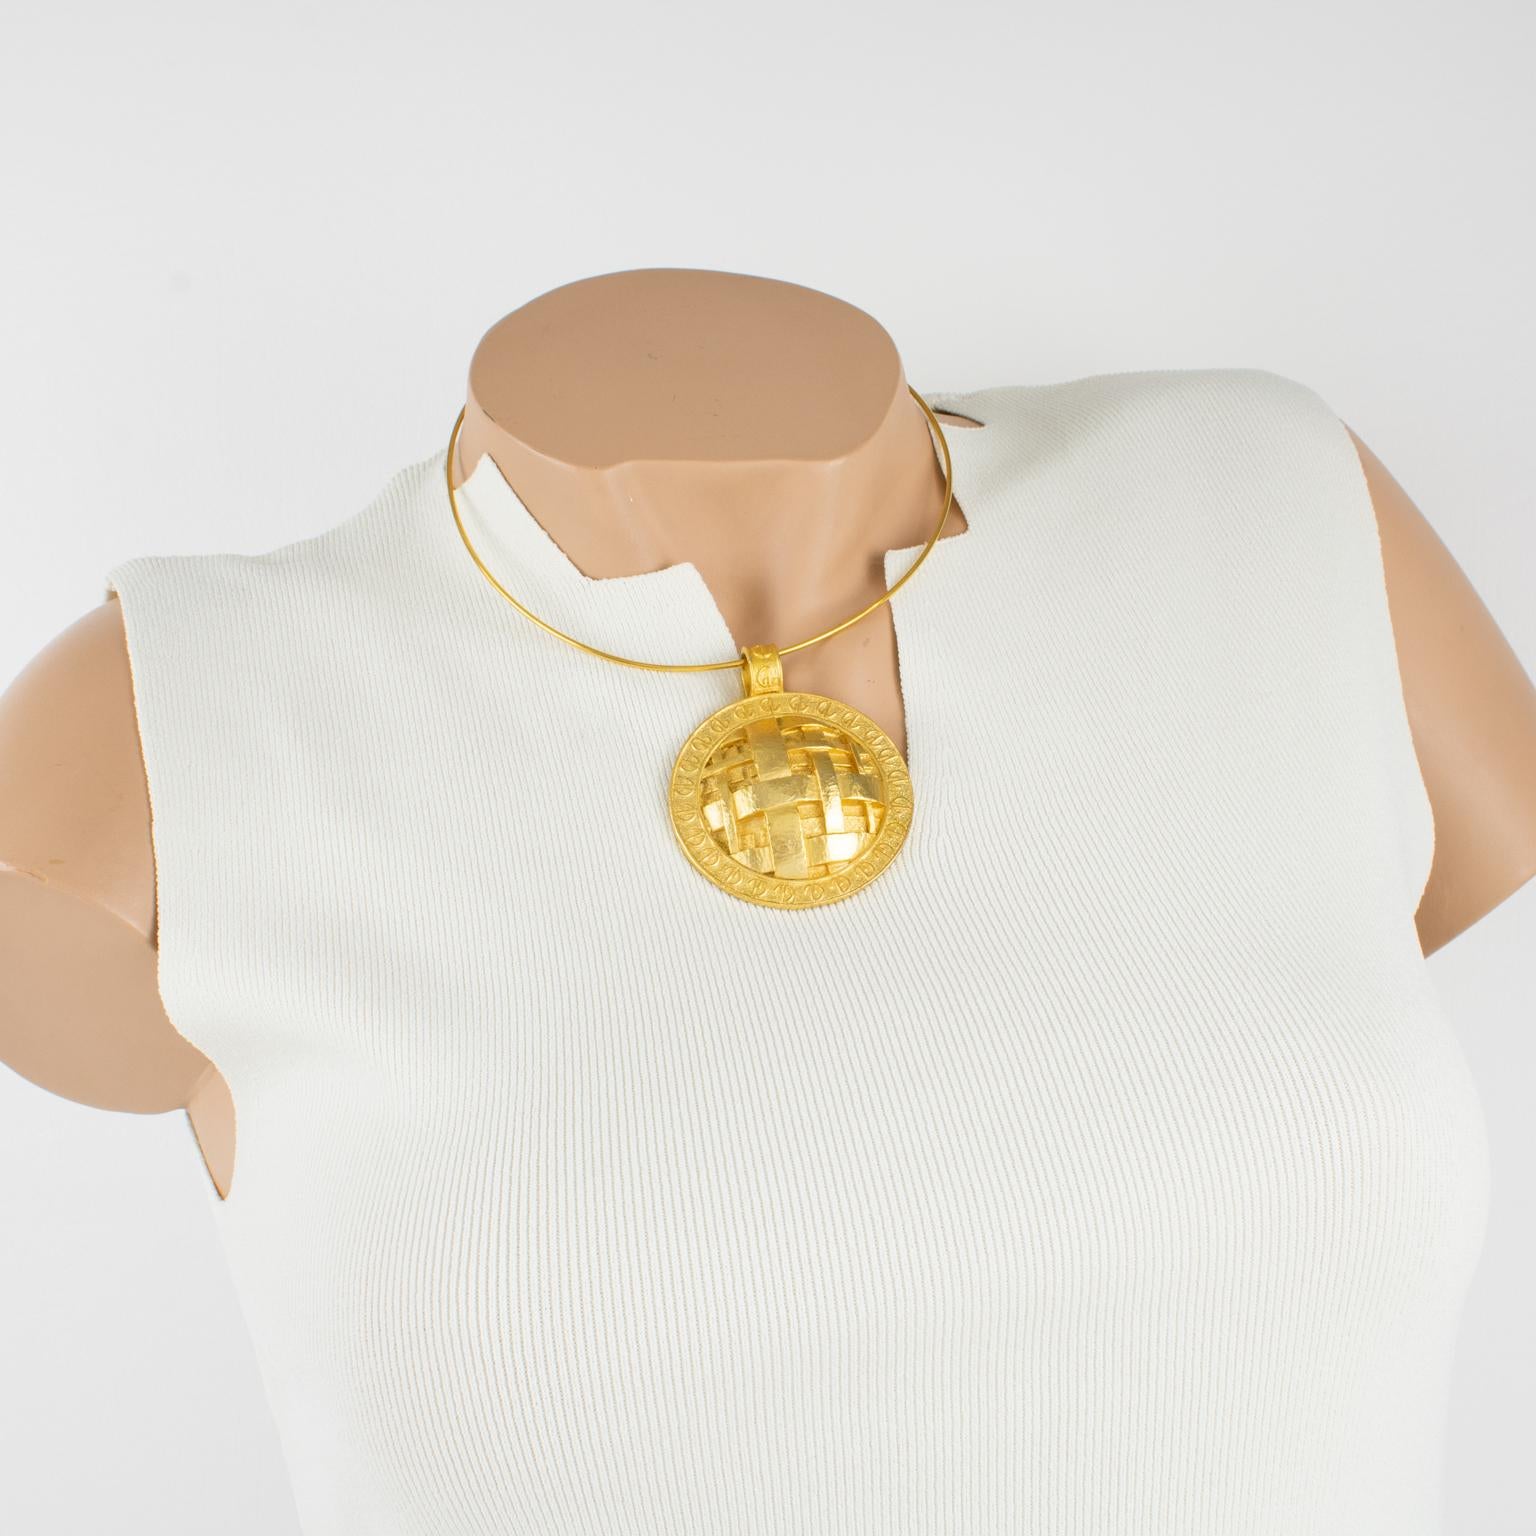 This impressive modernist Guy Laroche Paris signed medallion necklace features a rigid gilt metal collar with a massive gilt metal medallion. The metal medallion is dimensional with a textured design and braided carving topped with the 